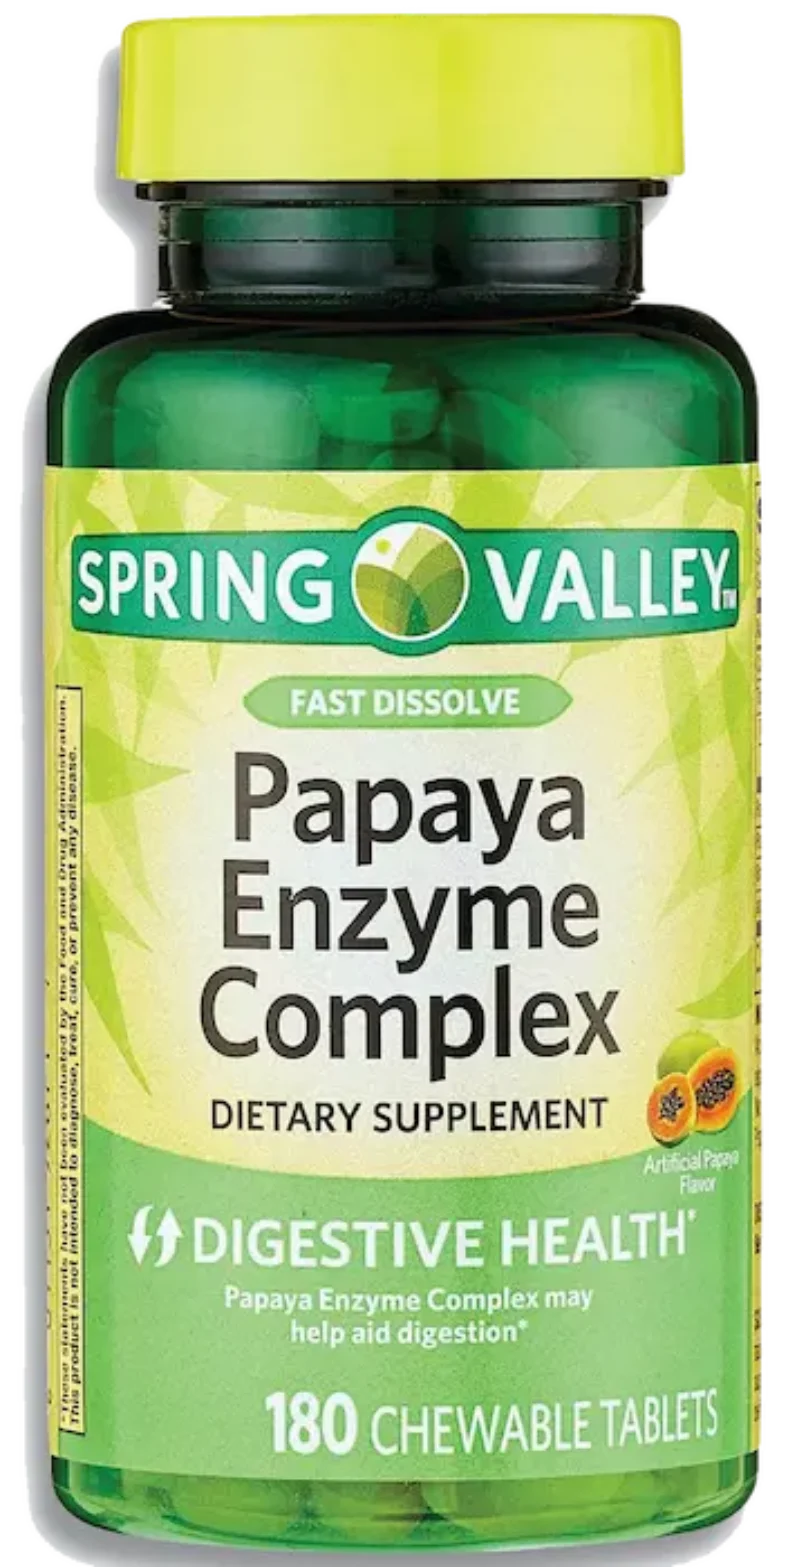 Spring Valley Papaya Enzyme Complex Chewable Tablets Dietary Supplement